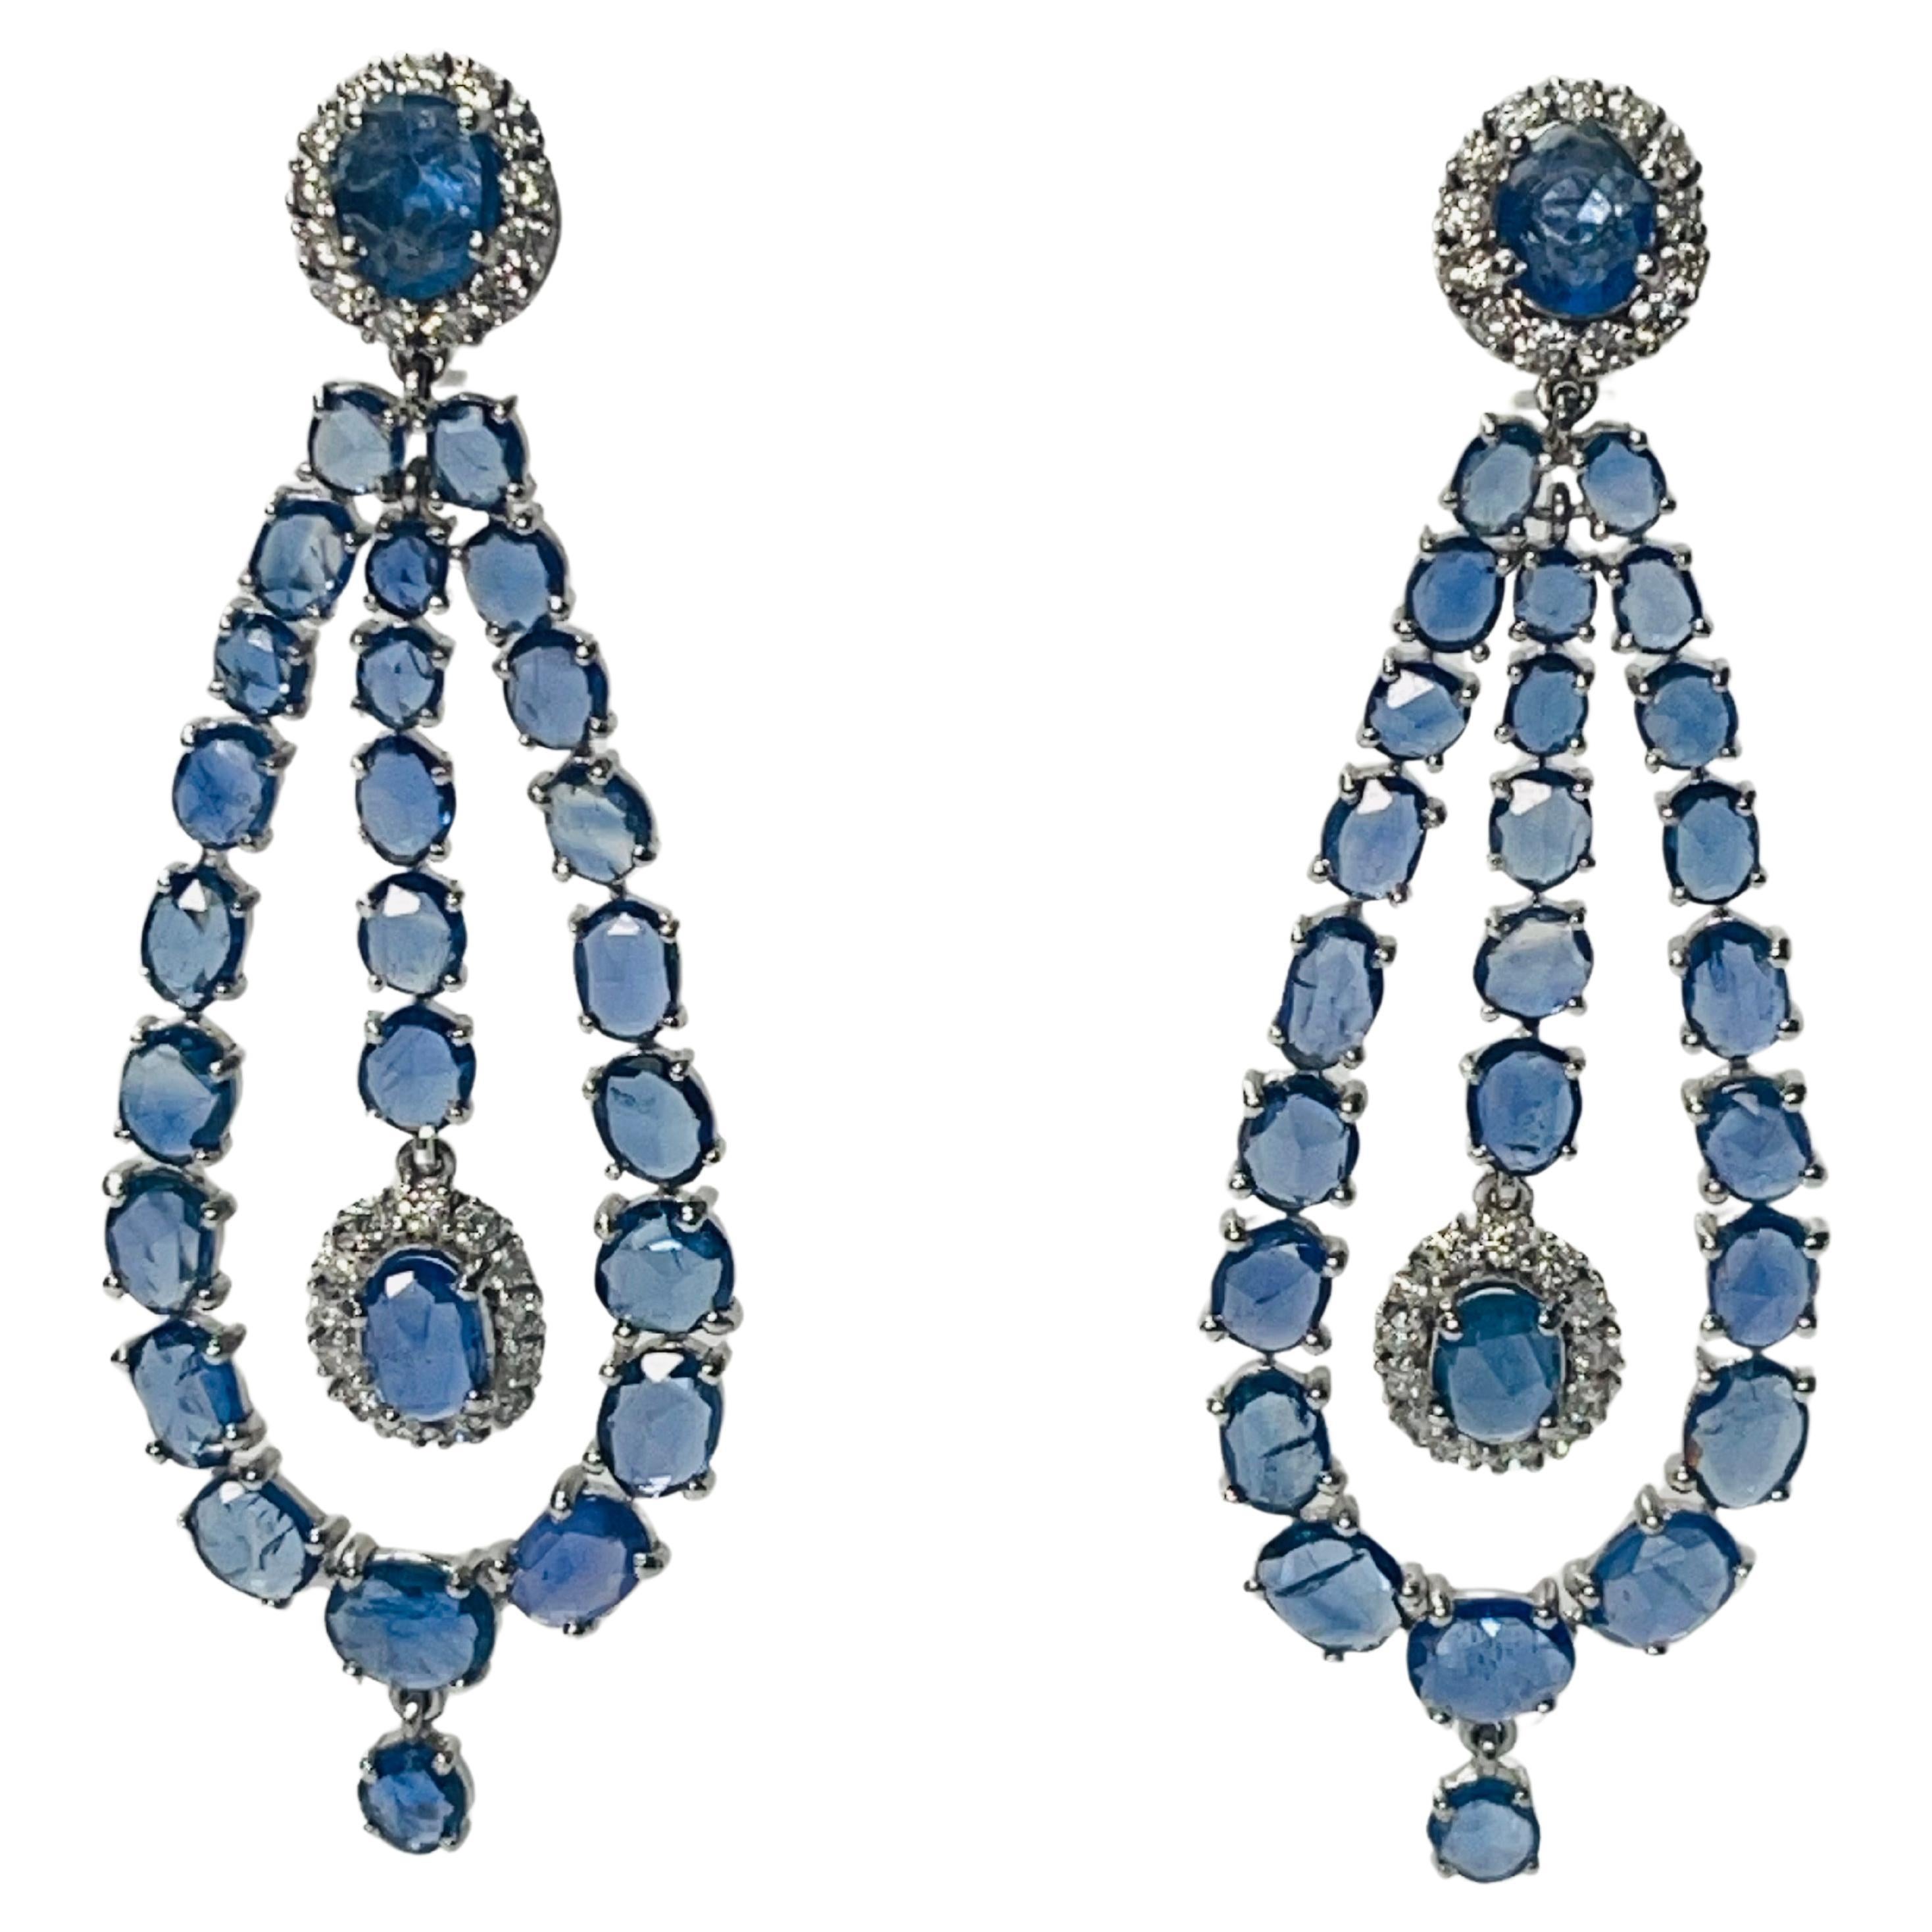  Blue Sapphire And Diamond Chandelier Earrings In 18K White Gold.  For Sale